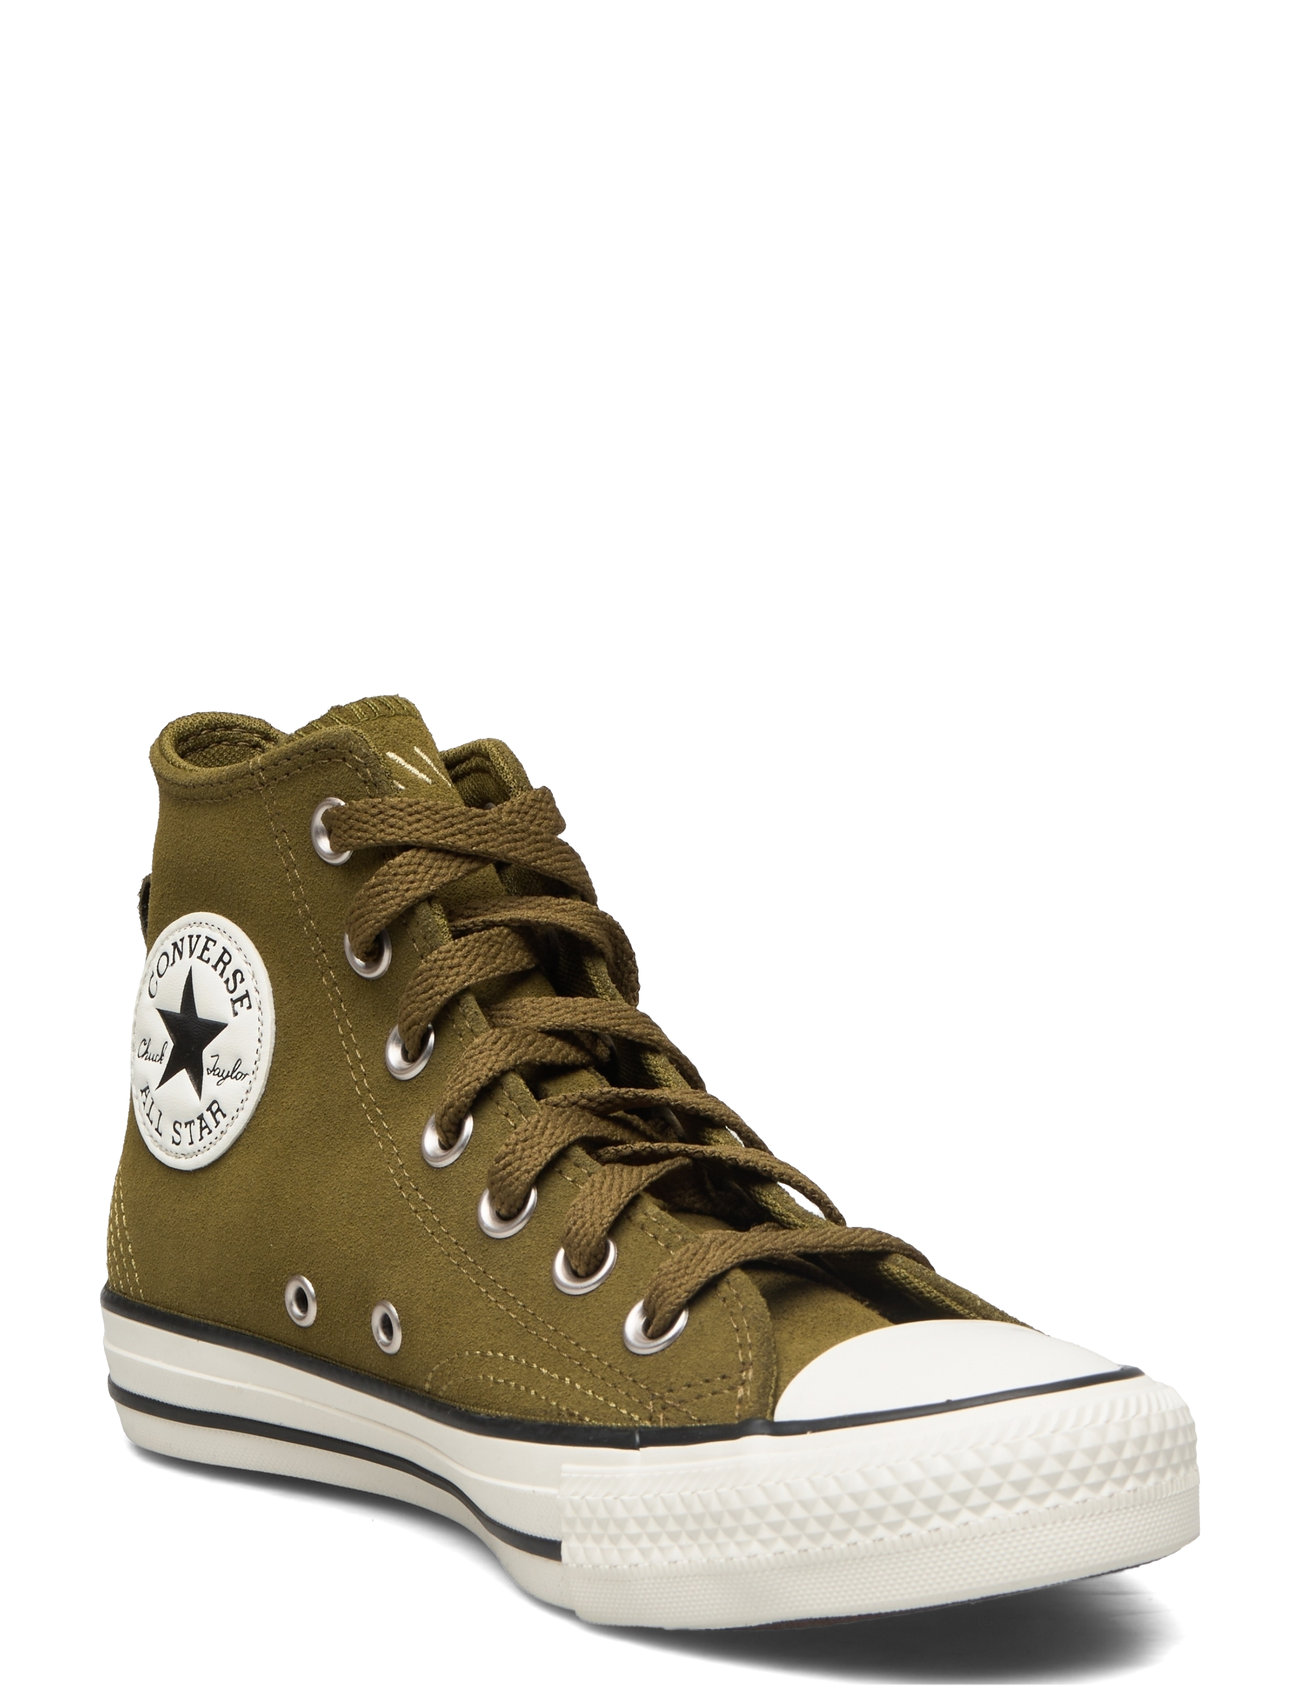 Chuck Taylor All Star Sport Sneakers High-top Sneakers Khaki Green Converse